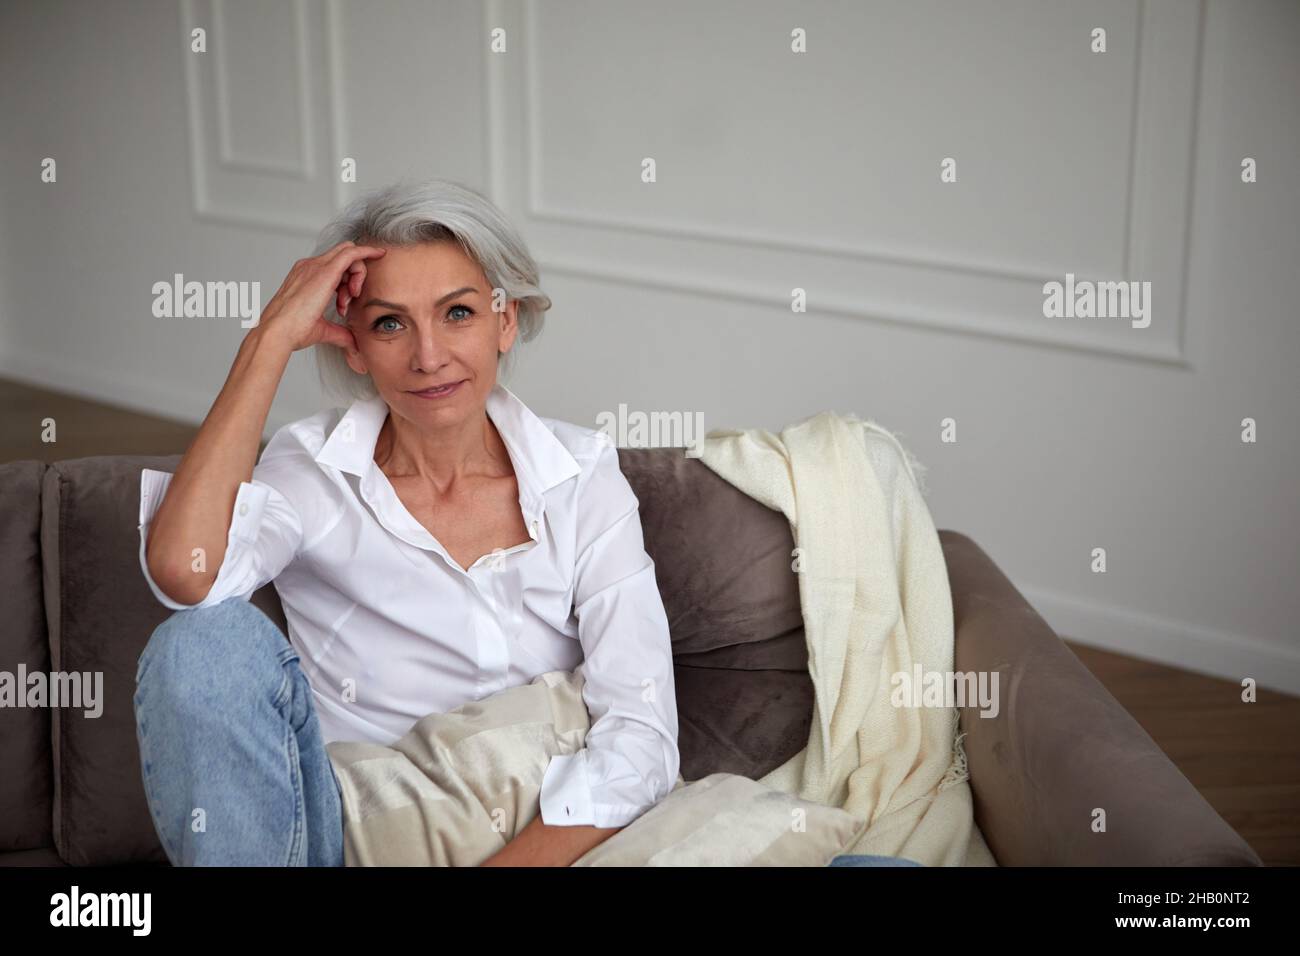 Smiling stylish mature female with gray hair sitting on sofa and leaning on hand while chilling in living room and looking at camera Stock Photo